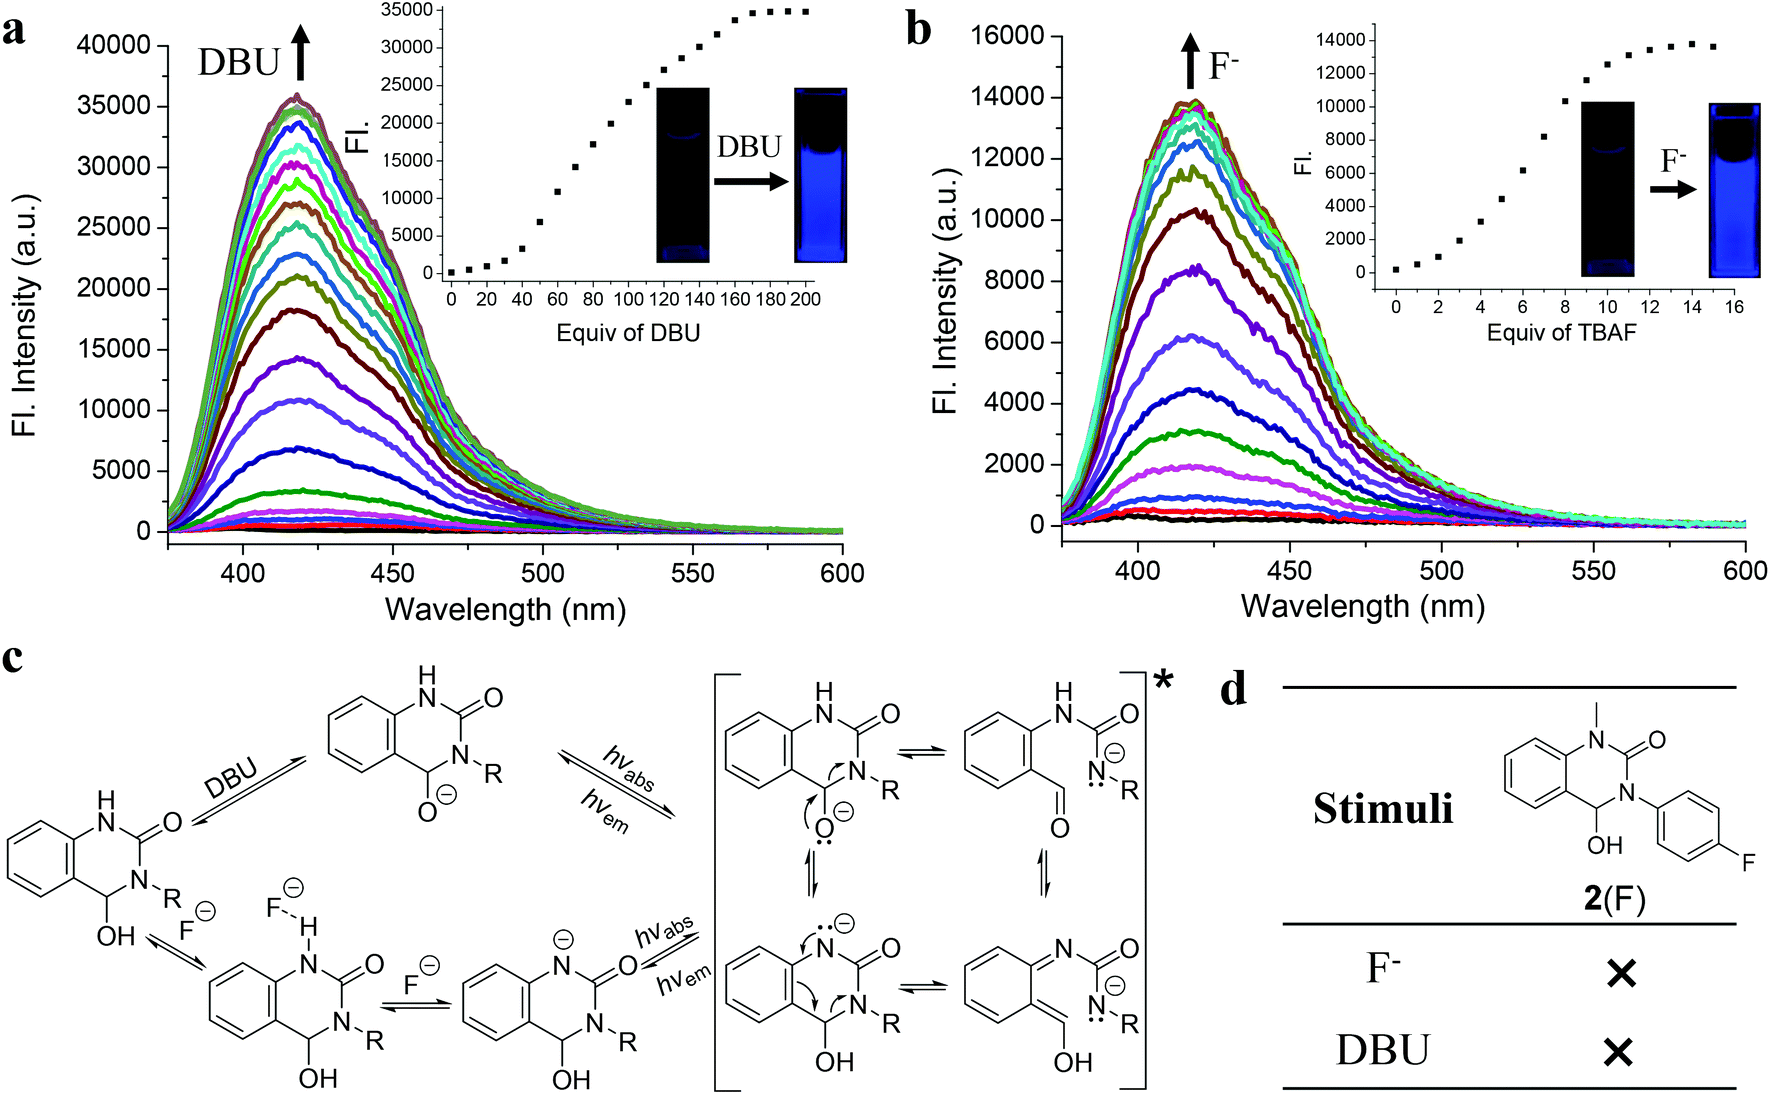 Dynamic covalent bond constrained ureas for multimode fluorescence  switching, thermally induced emission, and chemical signaling cascades -  Organic Chemistry Frontiers (RSC Publishing) DOI:10.1039/D1QO00500F